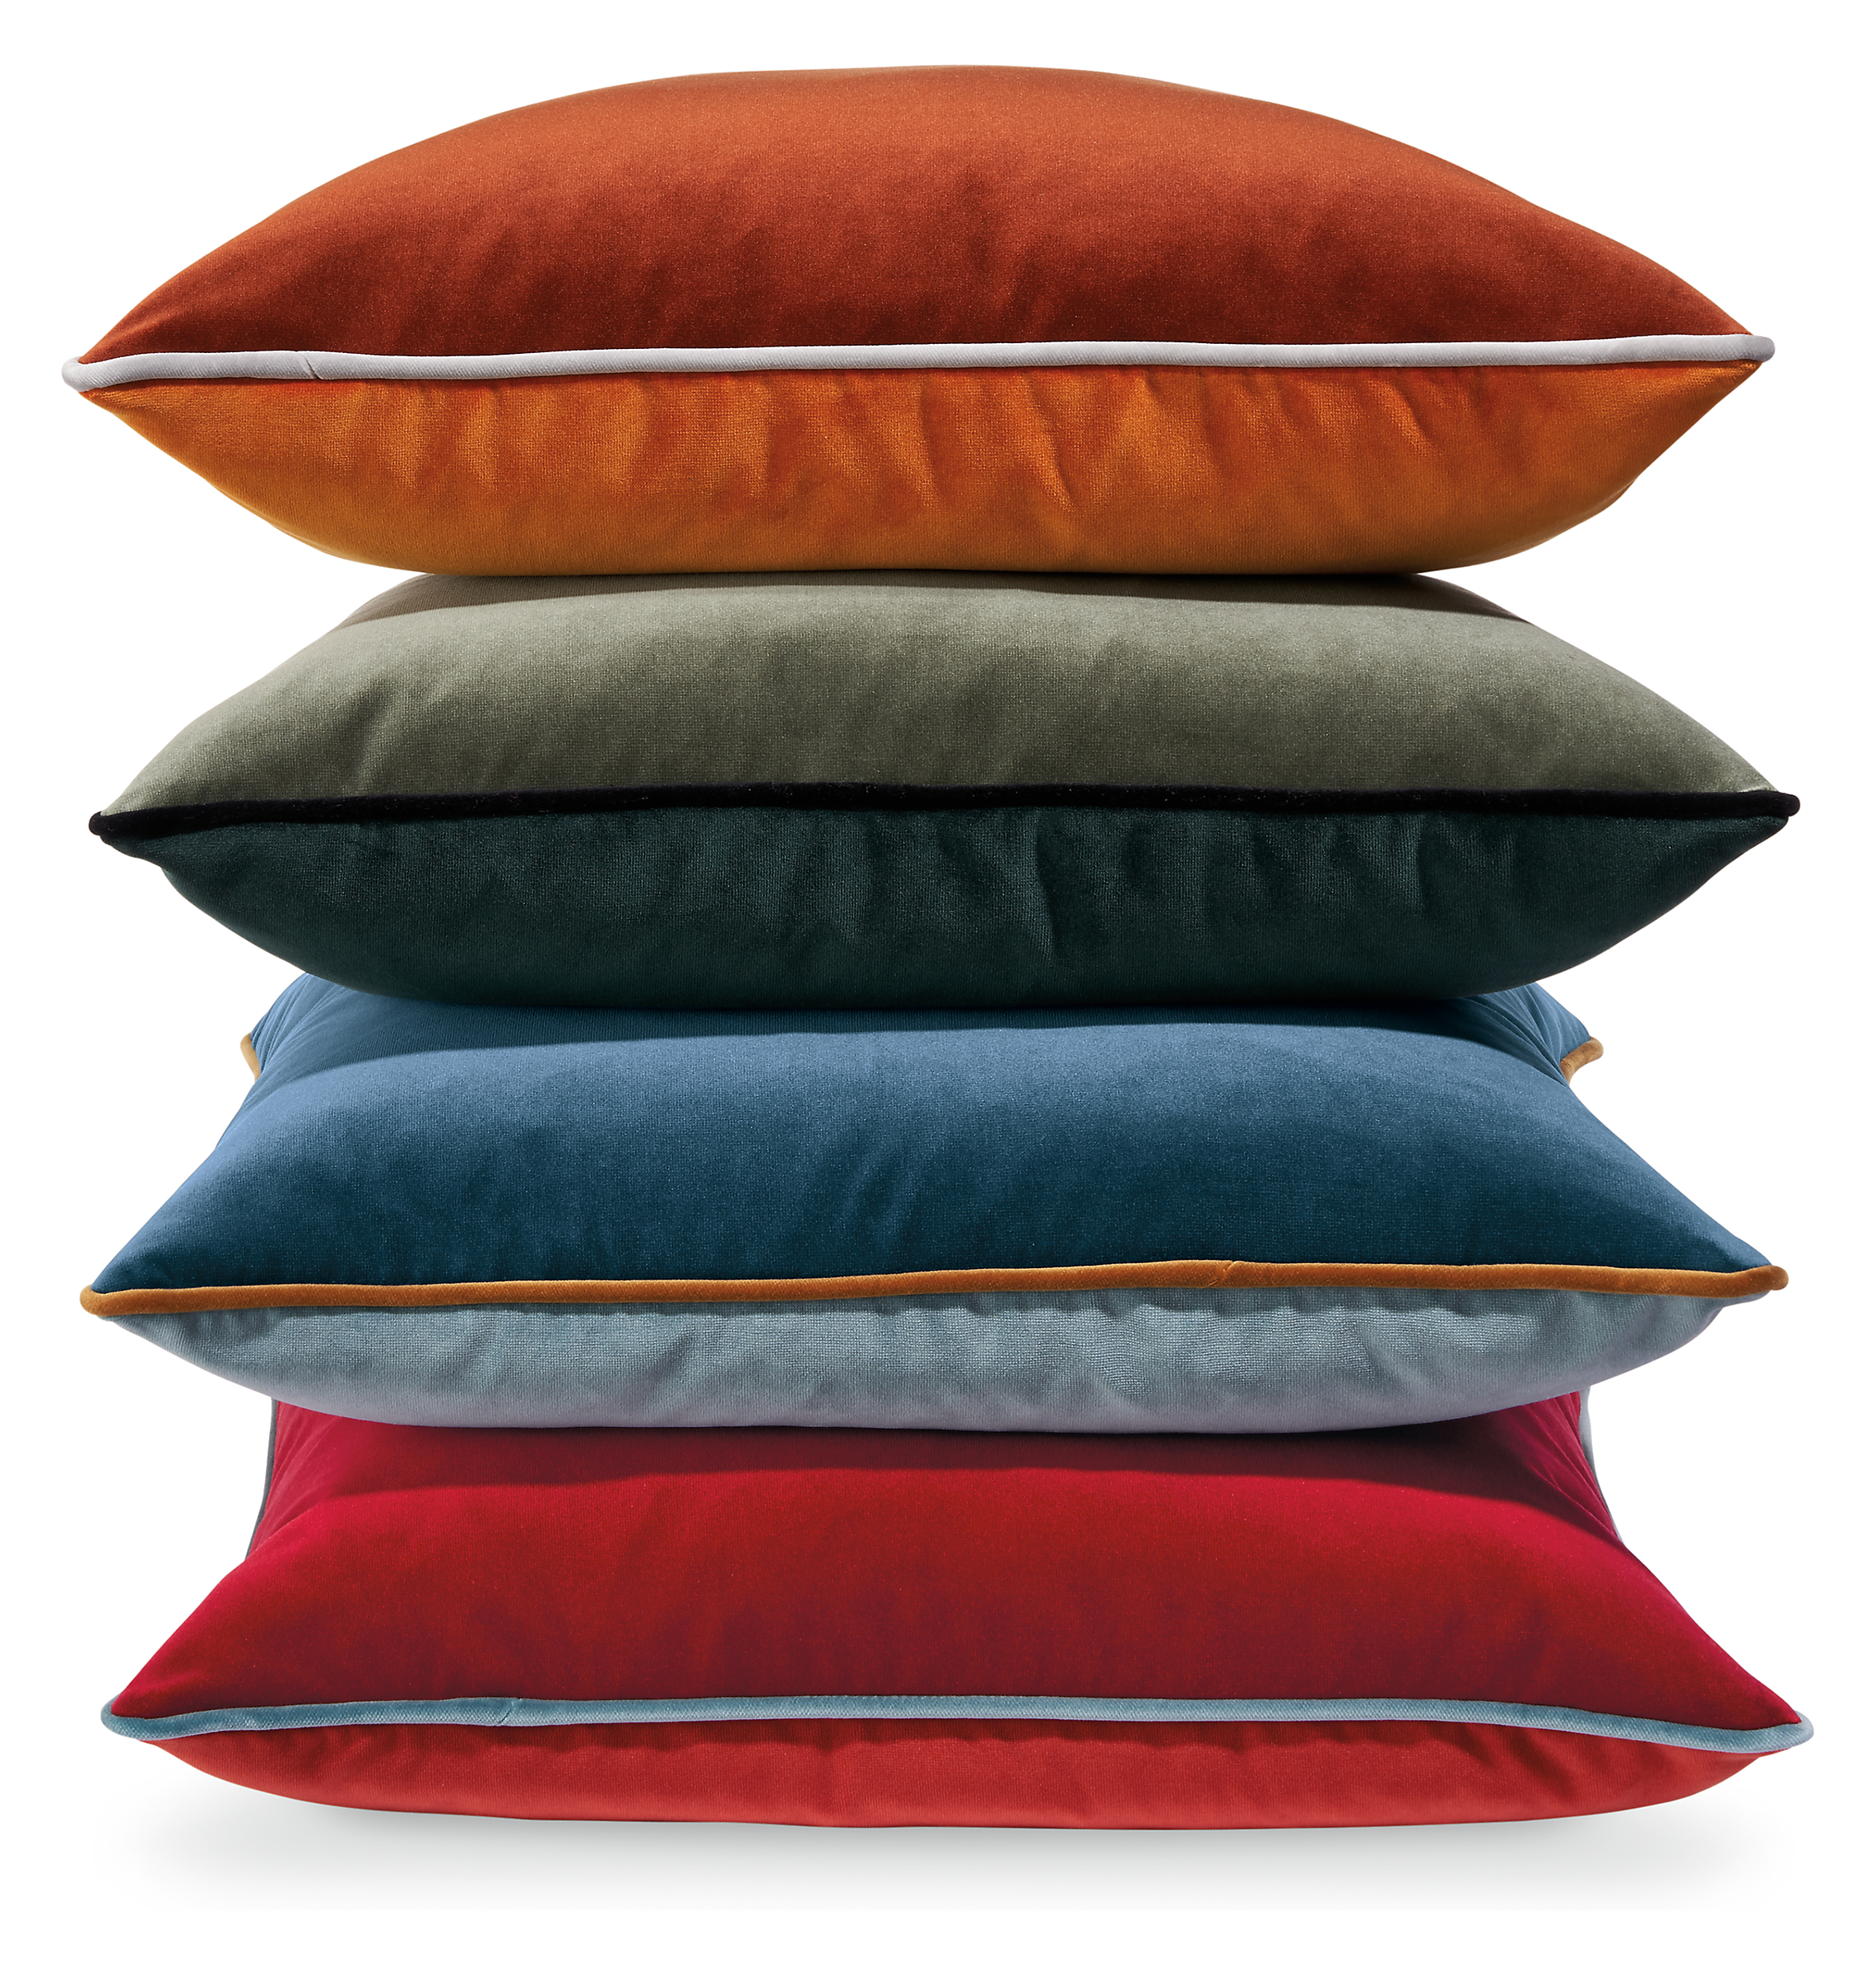 stack of throw pillows in Sienna,Fir, Blue and Red.